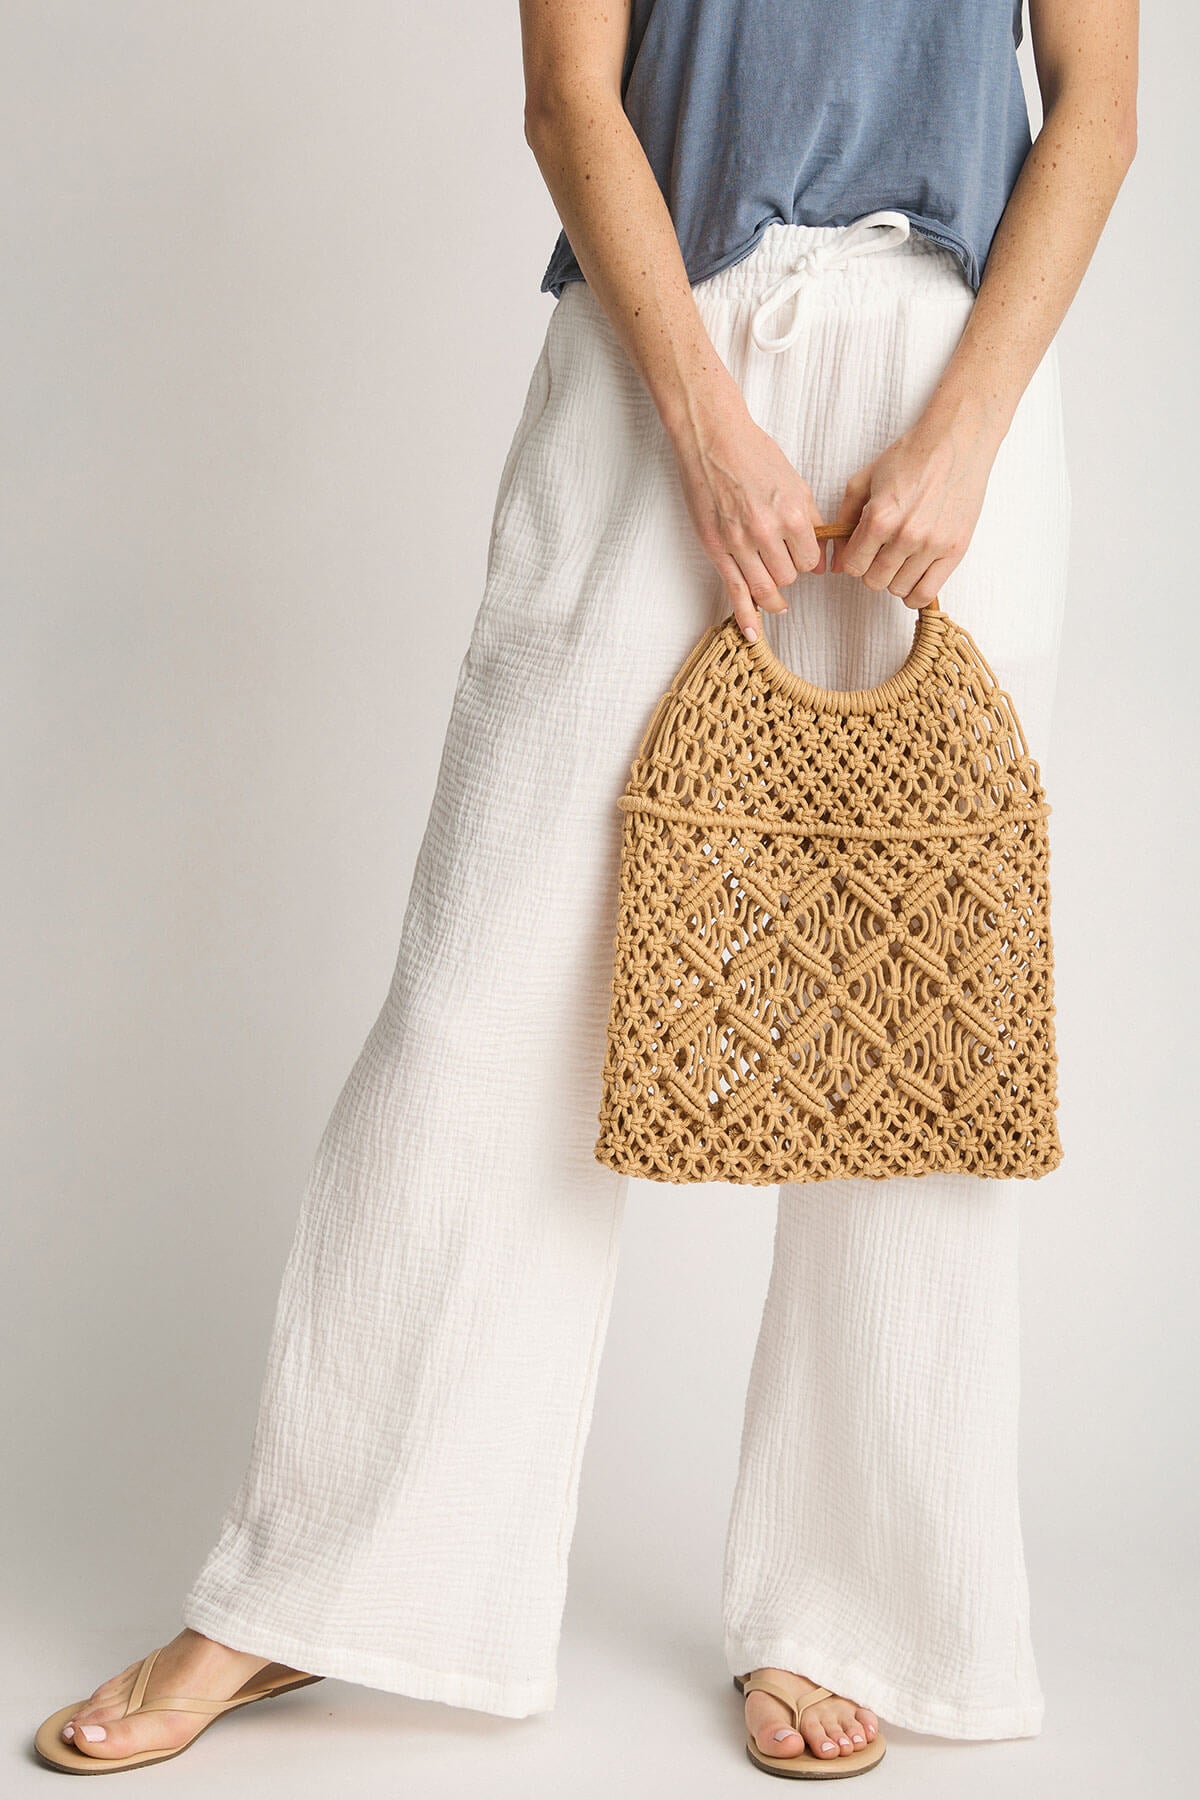 Faire Bamboo Handle Crochet Bag | Brown | Size One Size